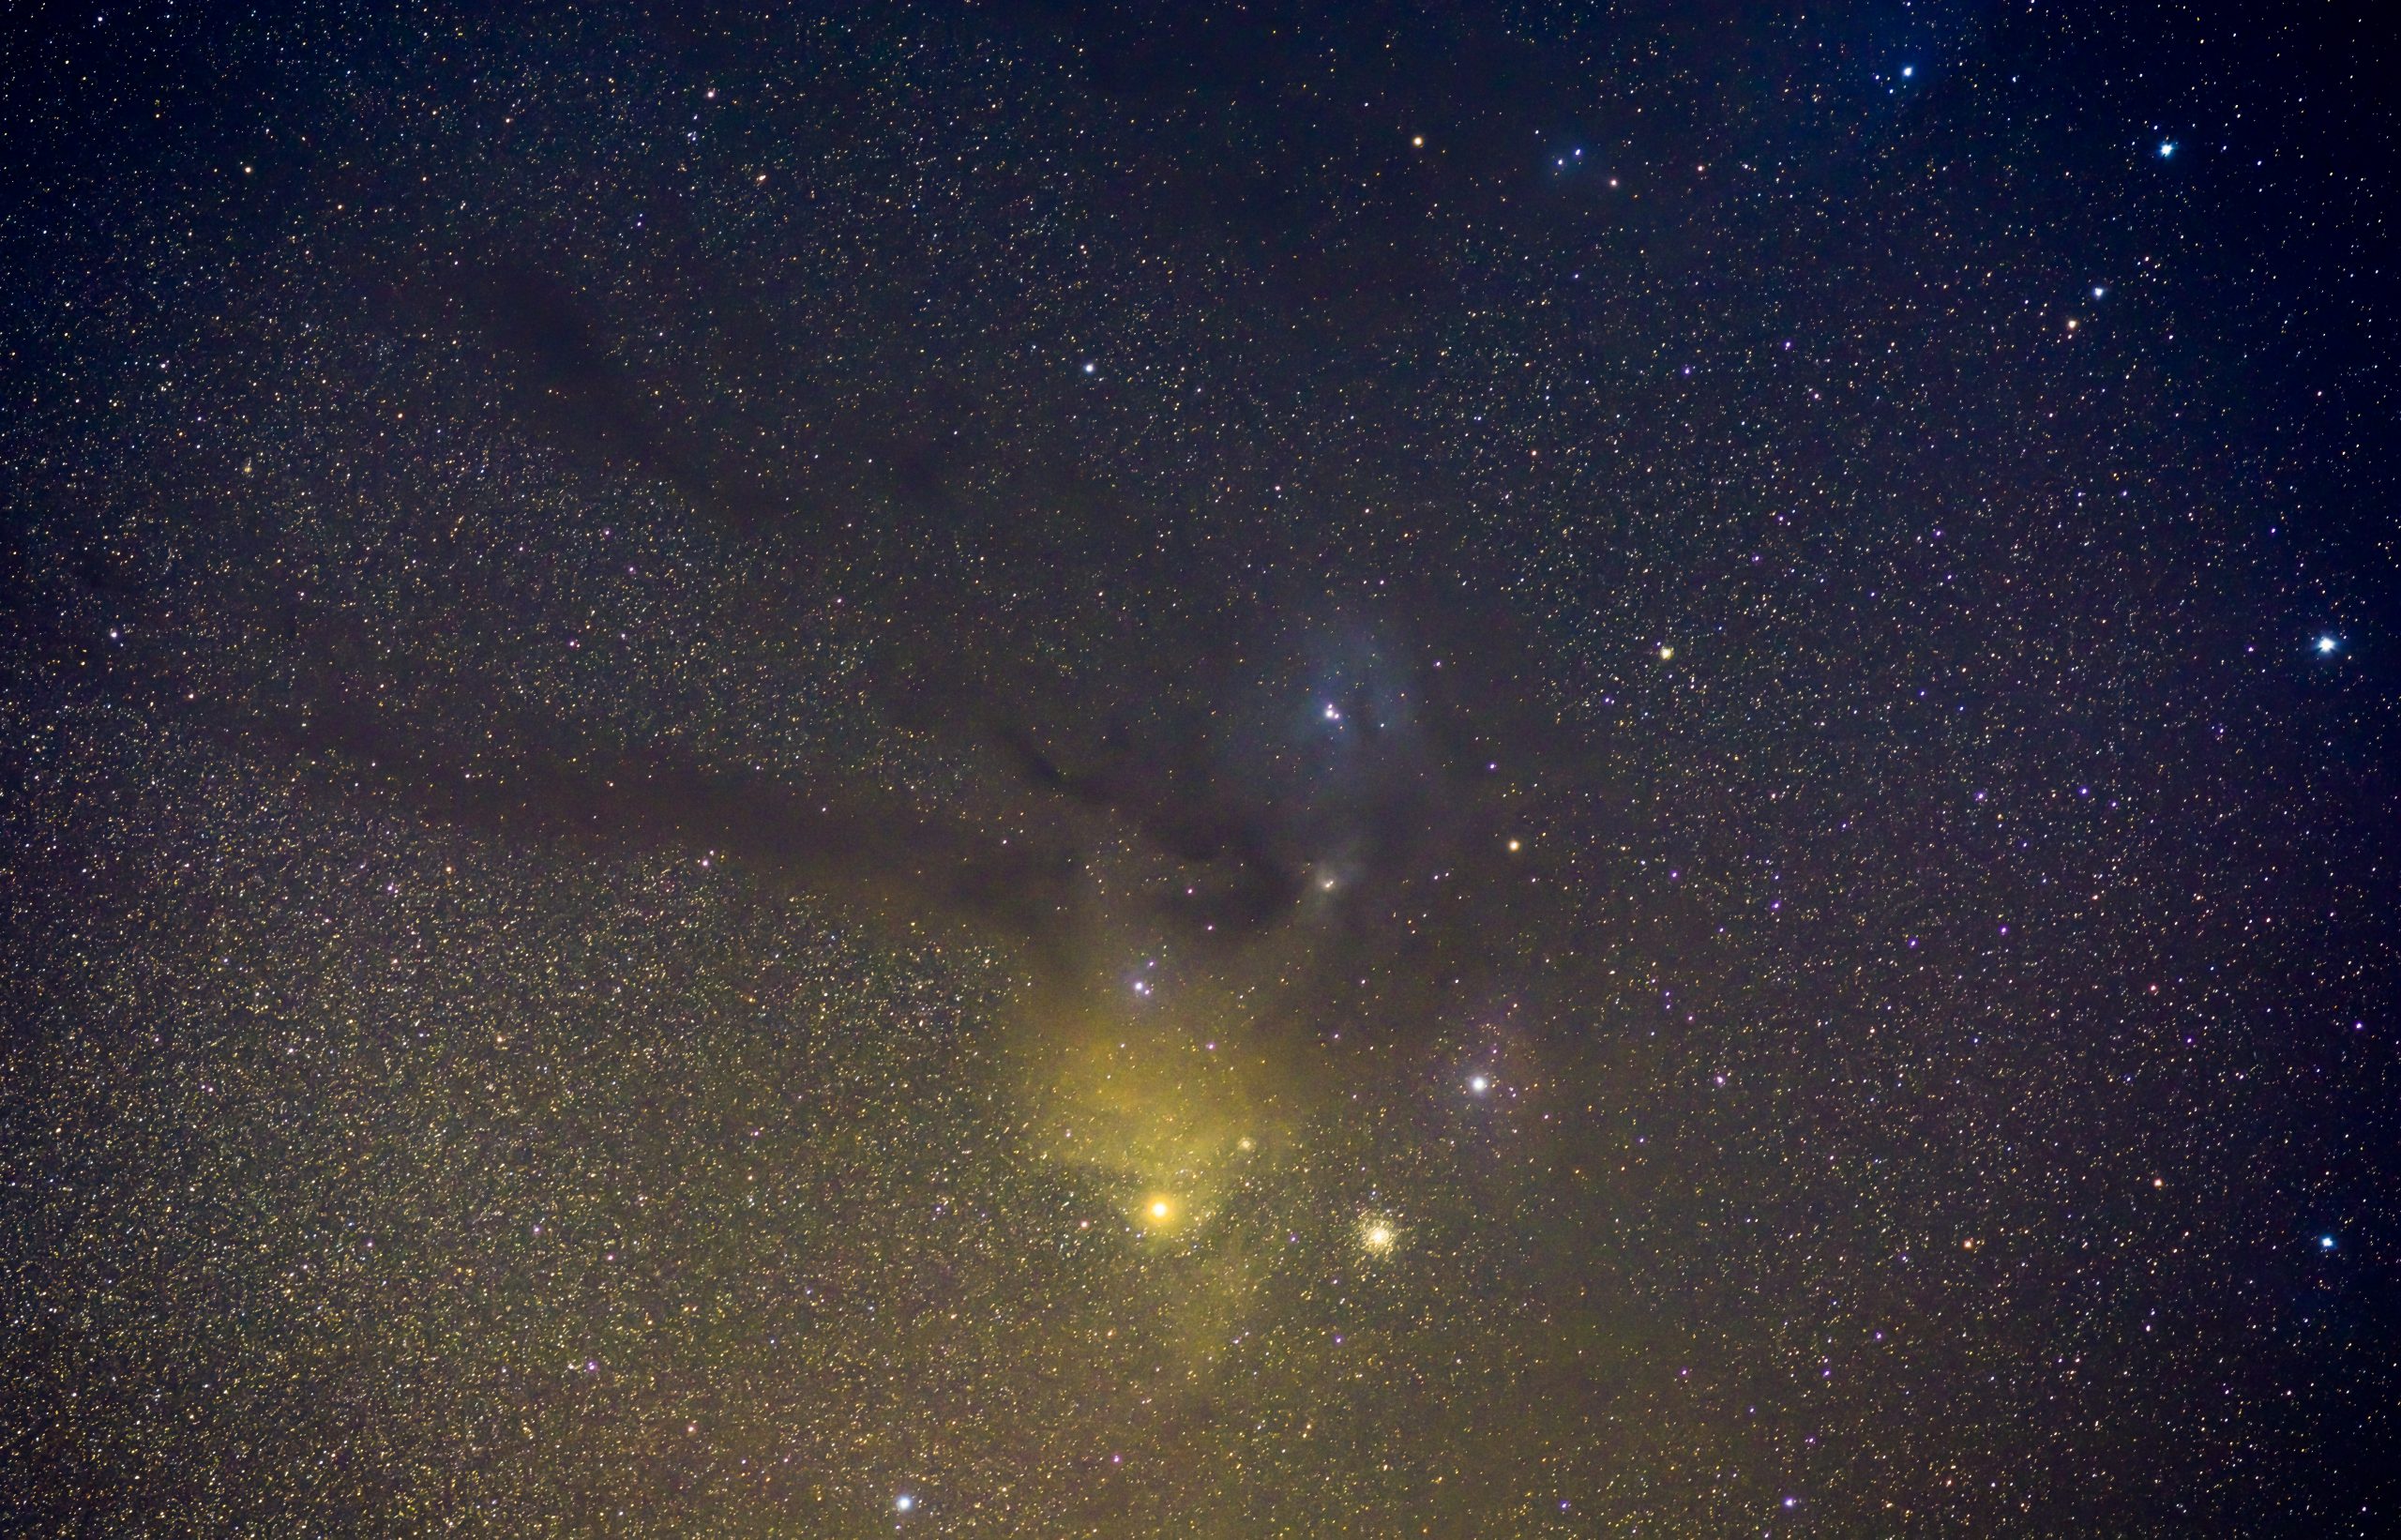 A photograph of the Rho Ophiuchi cloud complex. Image Credit: Ivan Petricevic.